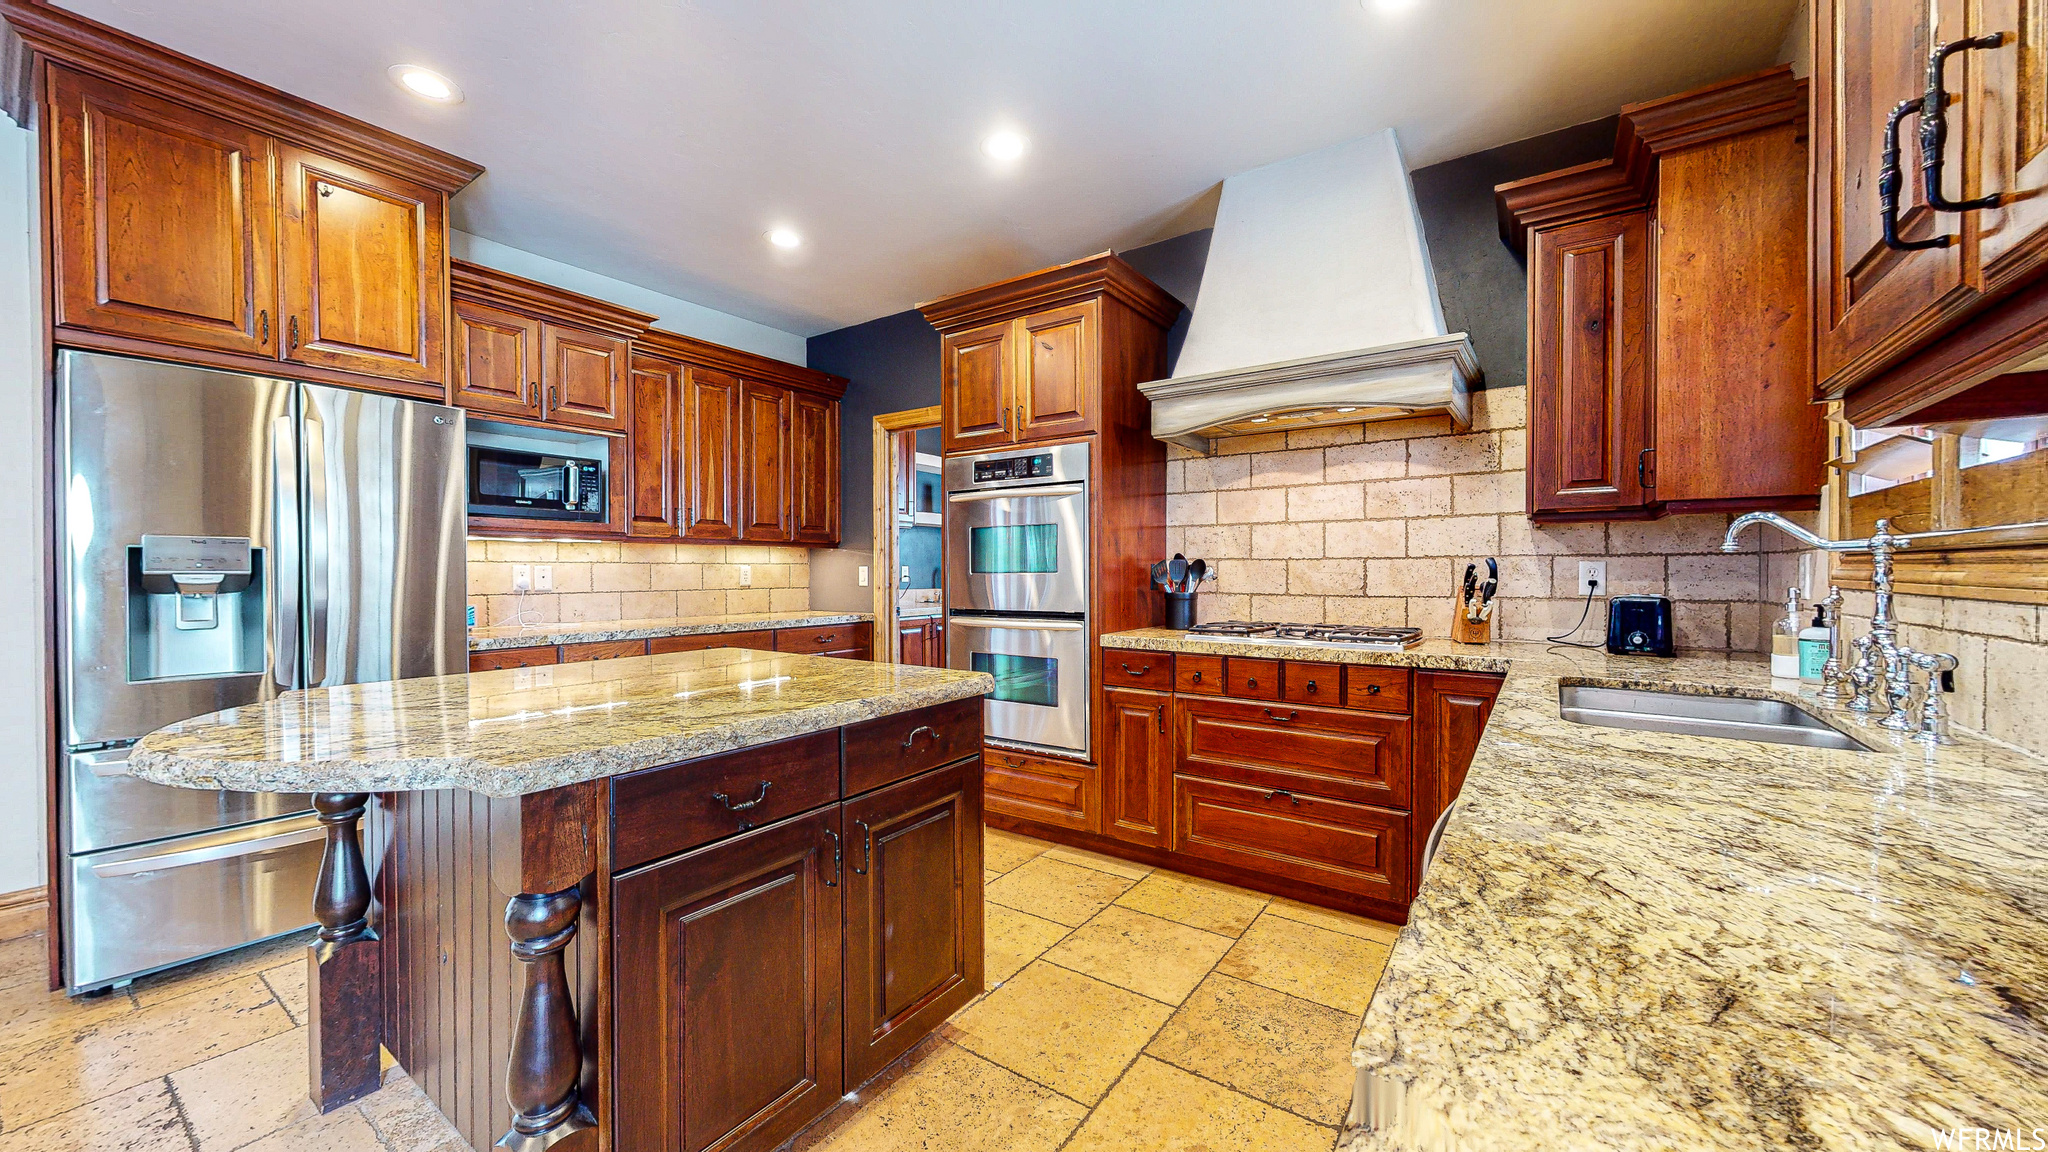 Granite countertops, stainless steal appliances, and dual ovens.